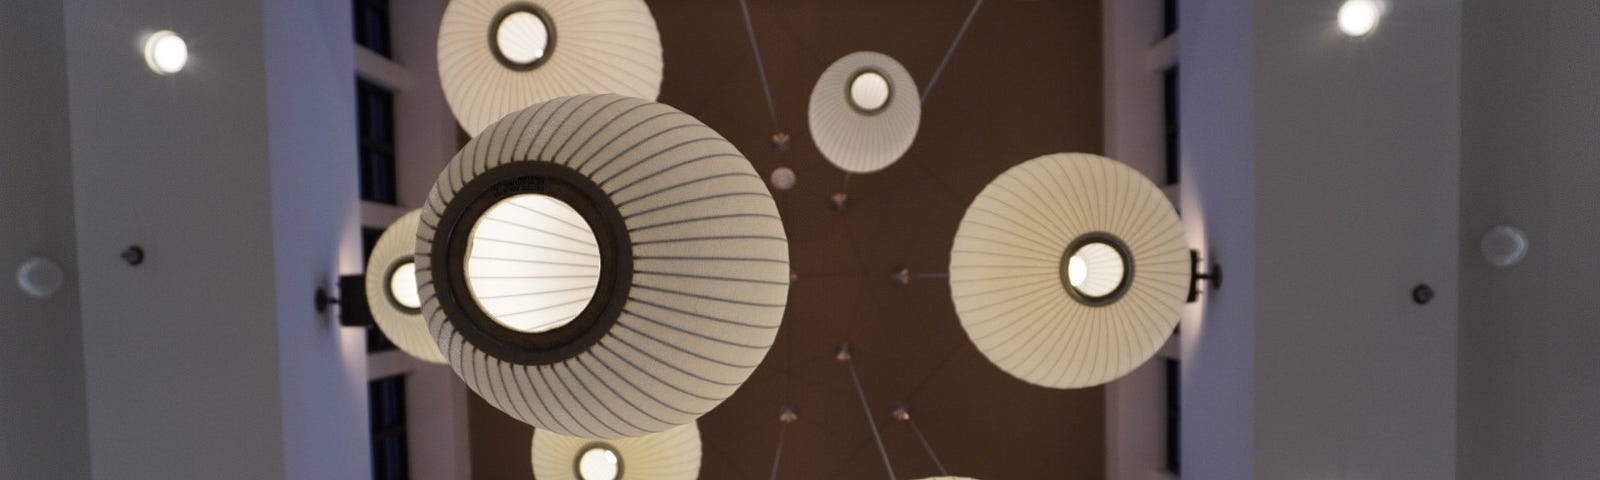 A view of a bunch of overhead lights from below.